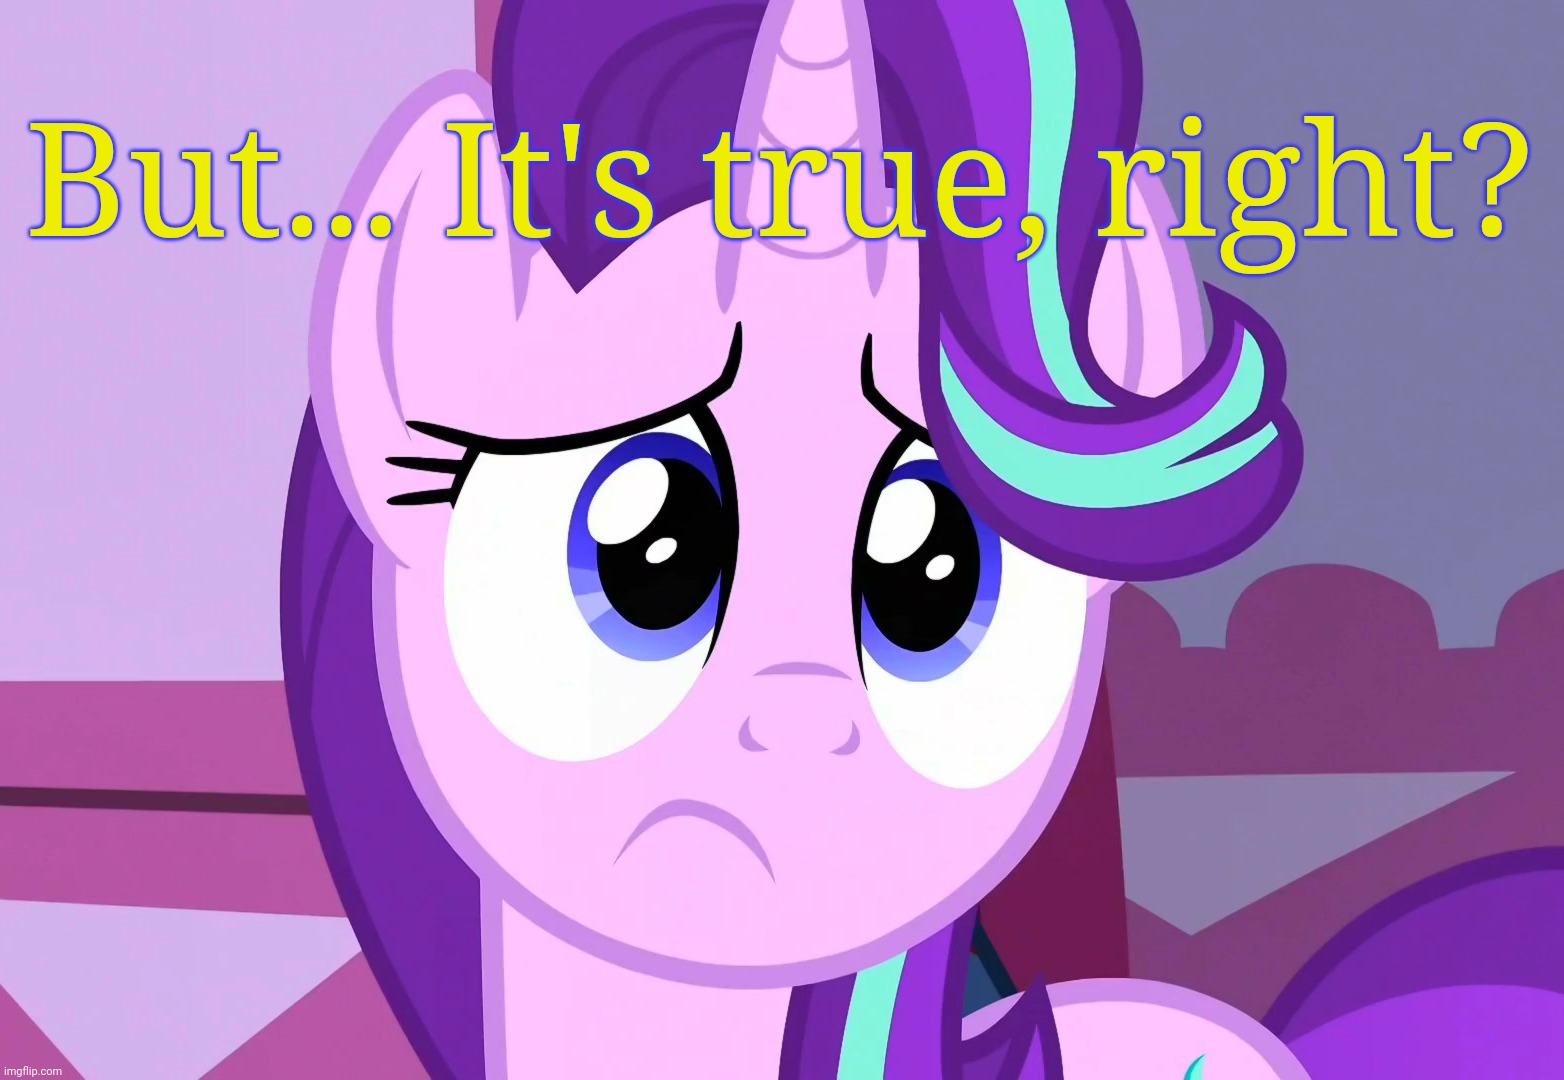 Sadlight Glimmer (MLP) | But... It's true, right? | image tagged in sadlight glimmer mlp | made w/ Imgflip meme maker